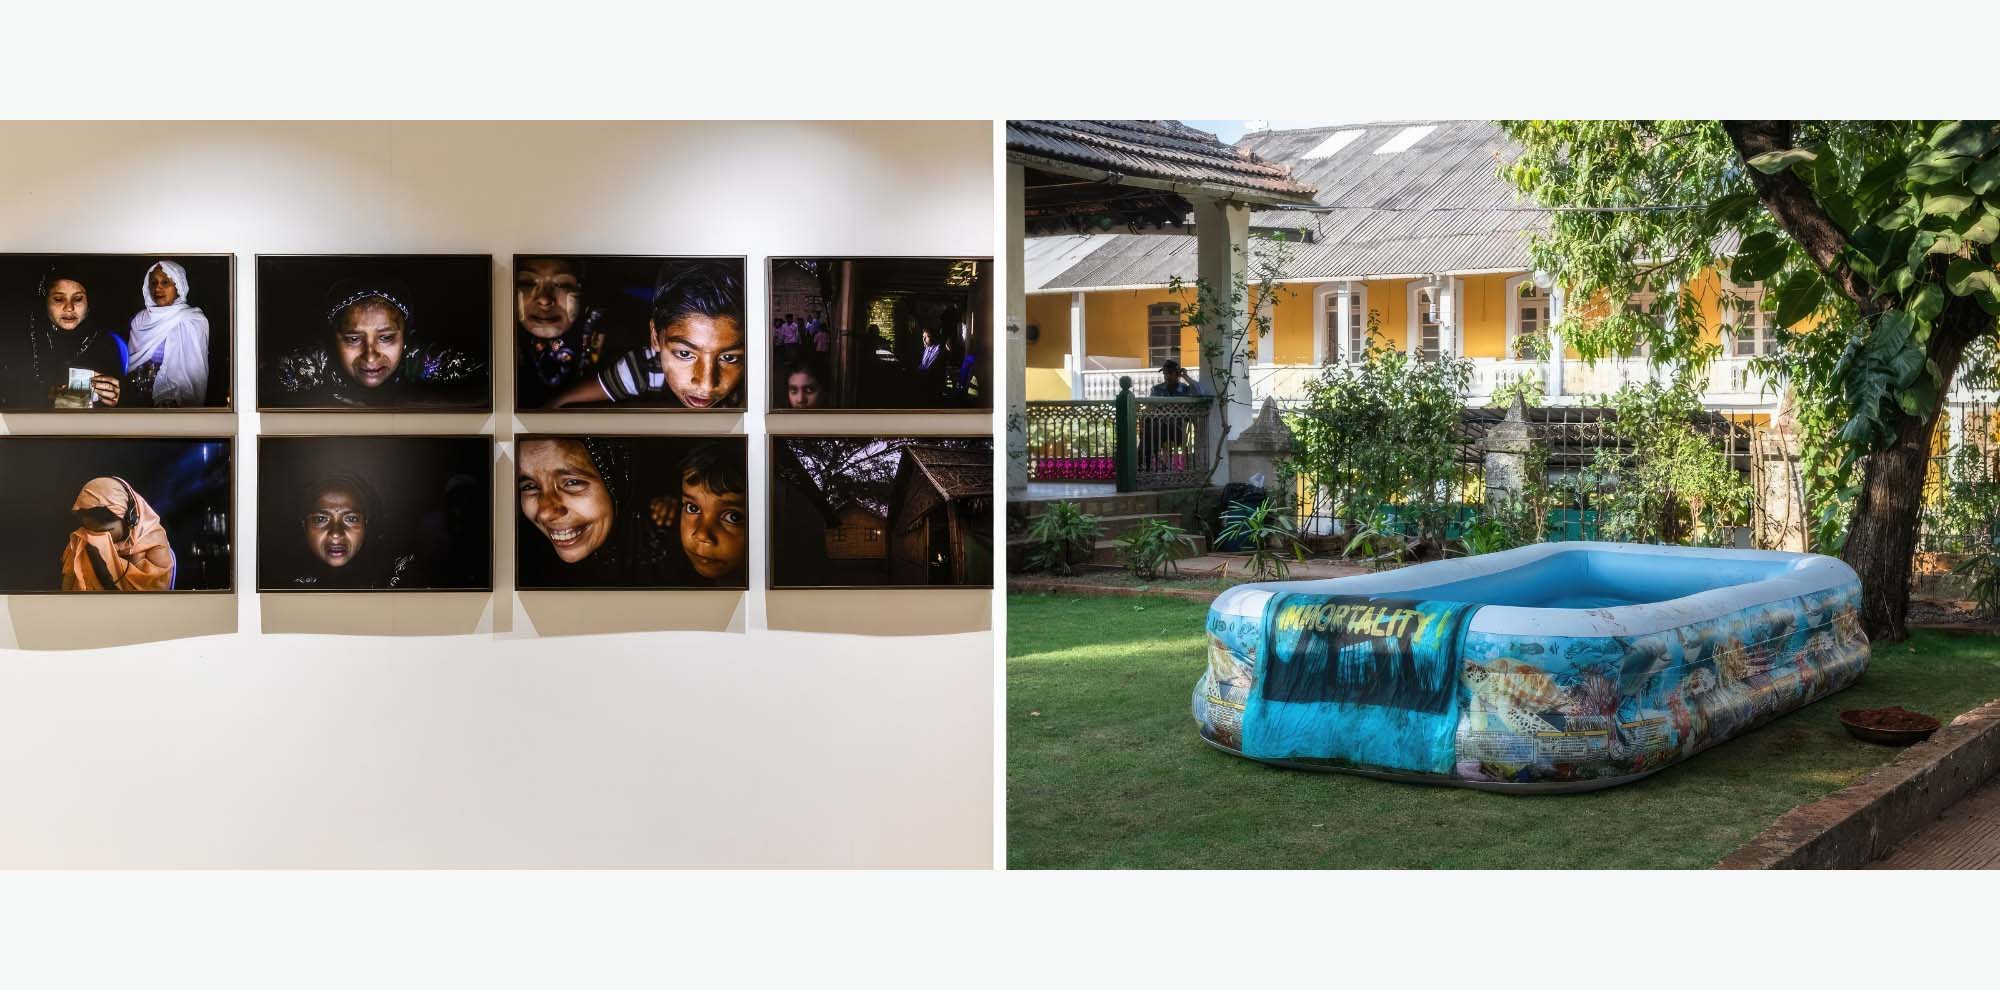 A collage where the left photograph shows a collection of images hung on a white wall. The right photograph shows an inflatable pool in a garden with a yellow building in the background.